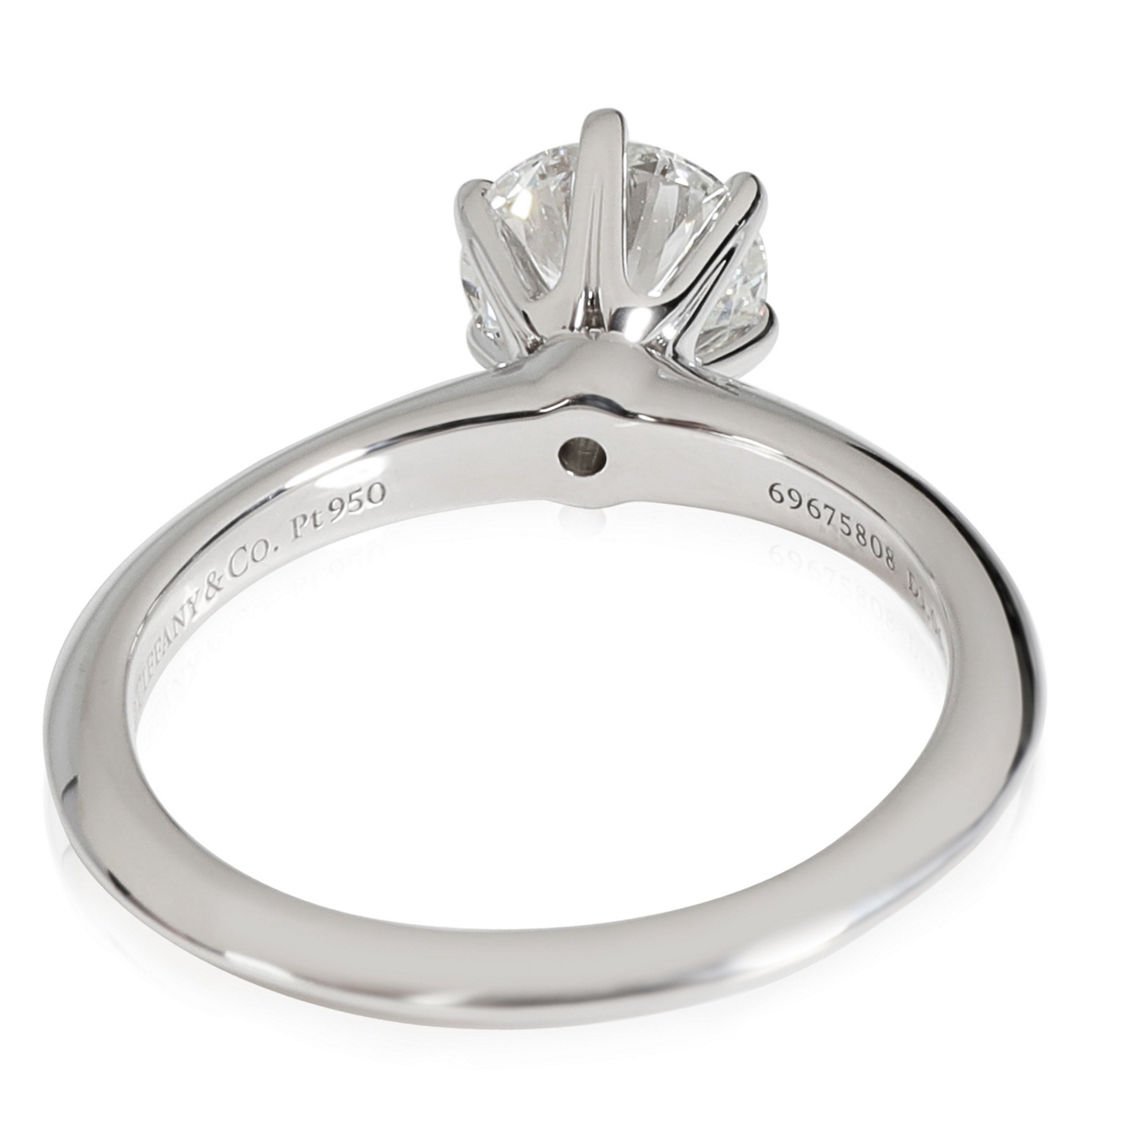 Tiffany & Co. Bridal Solitaire Ring Pre-Owned - Image 3 of 4